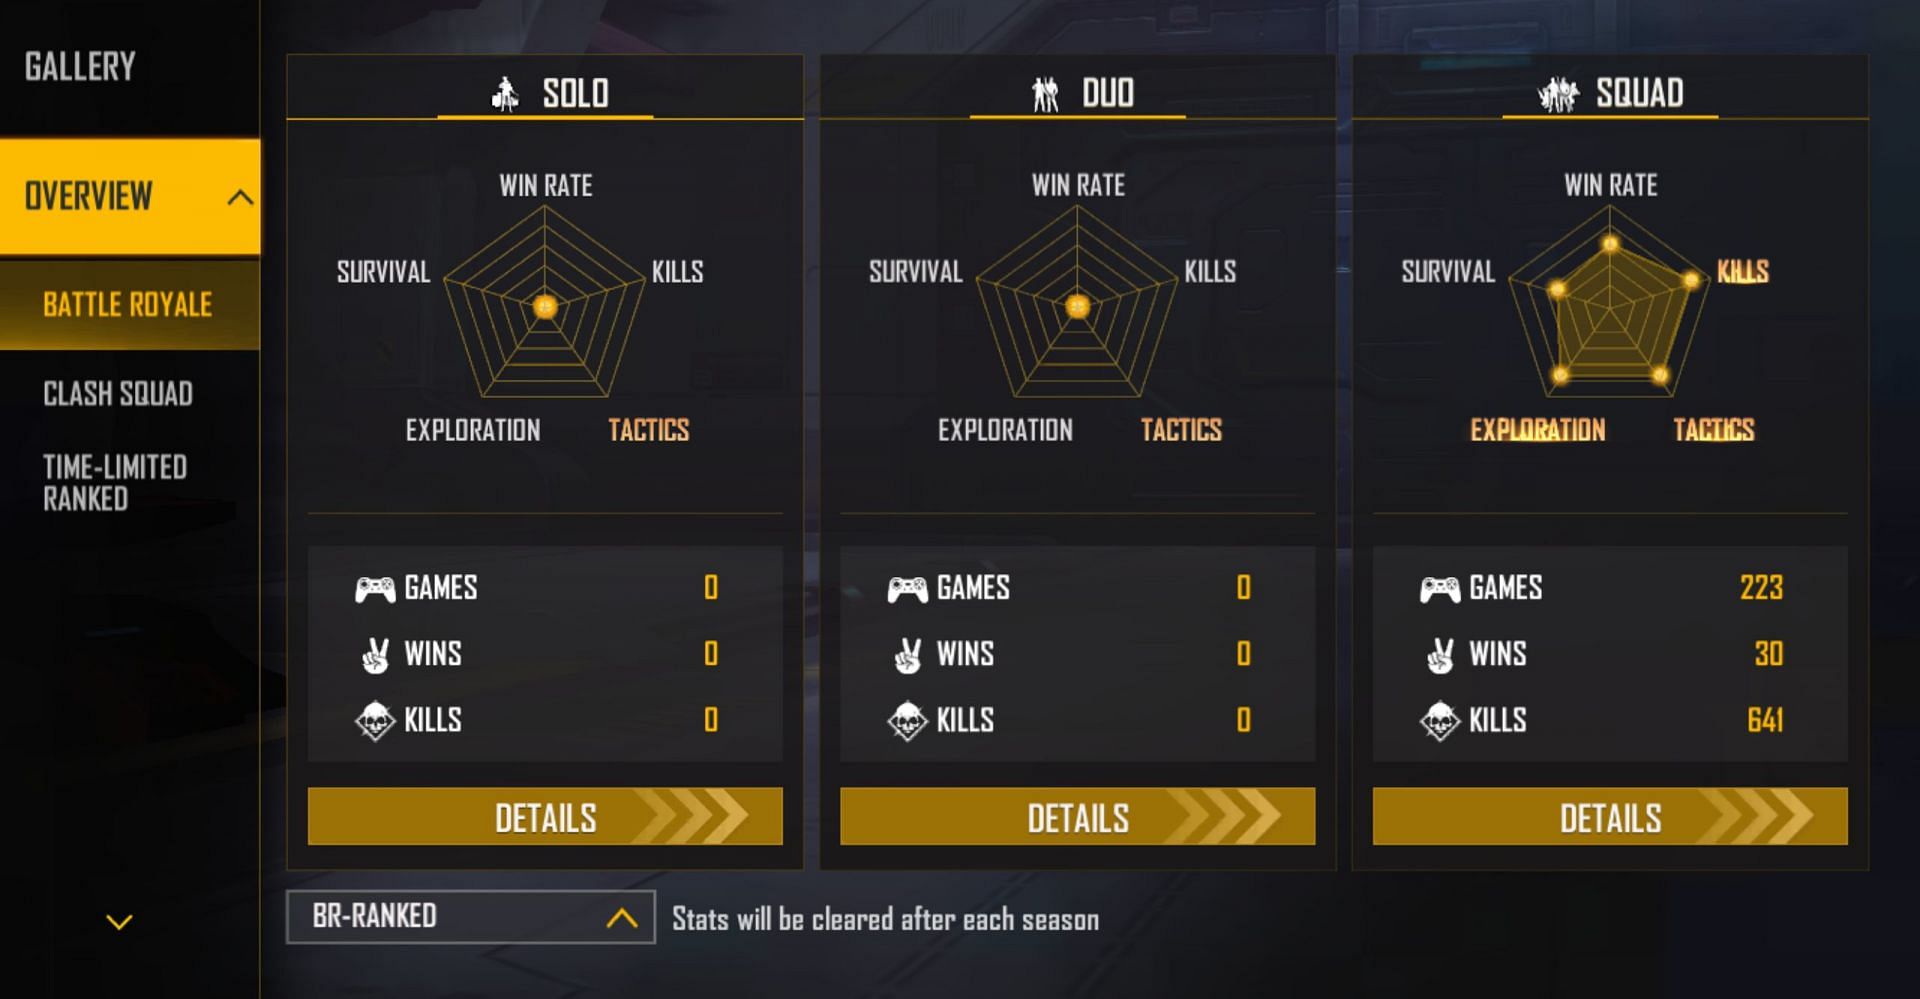 BNL has not played in ranked solo and duo matches (Image via Garena)